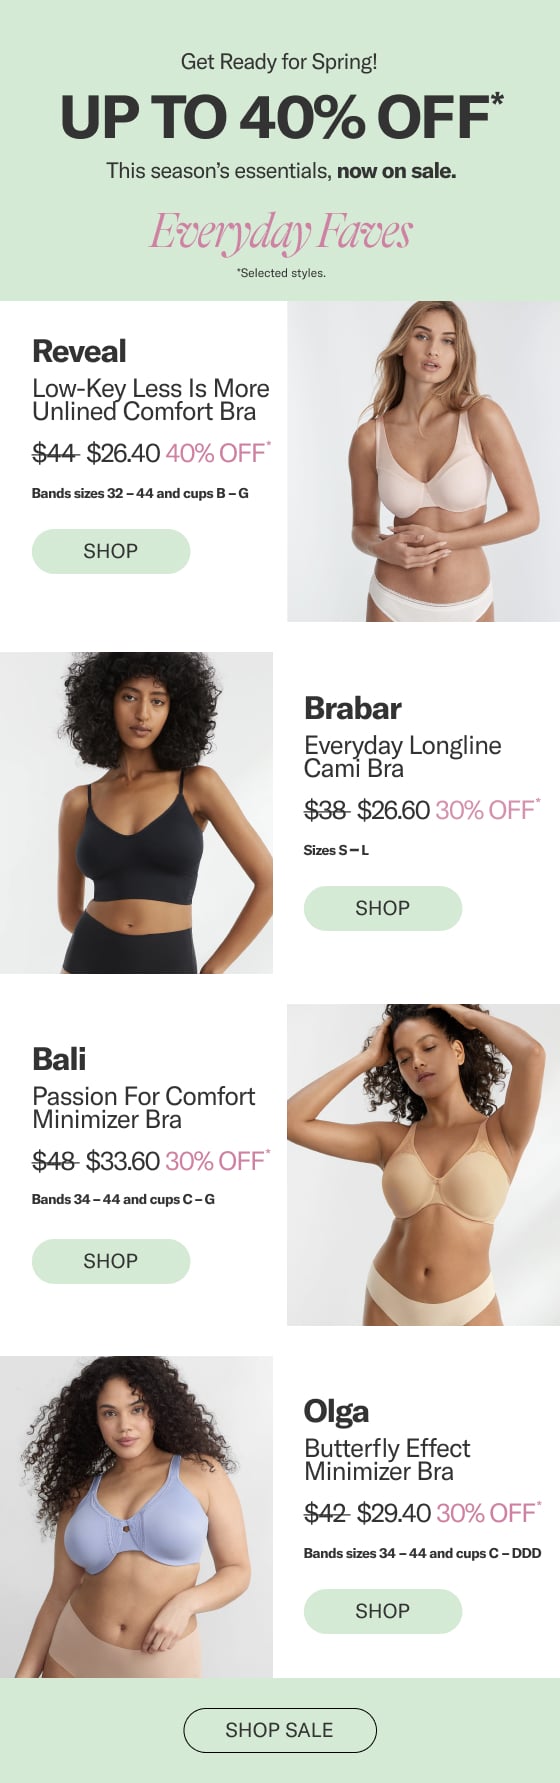 Shop Sports Bras Up To 40% Off! Sale Ends Tonight! - Bare Necessities